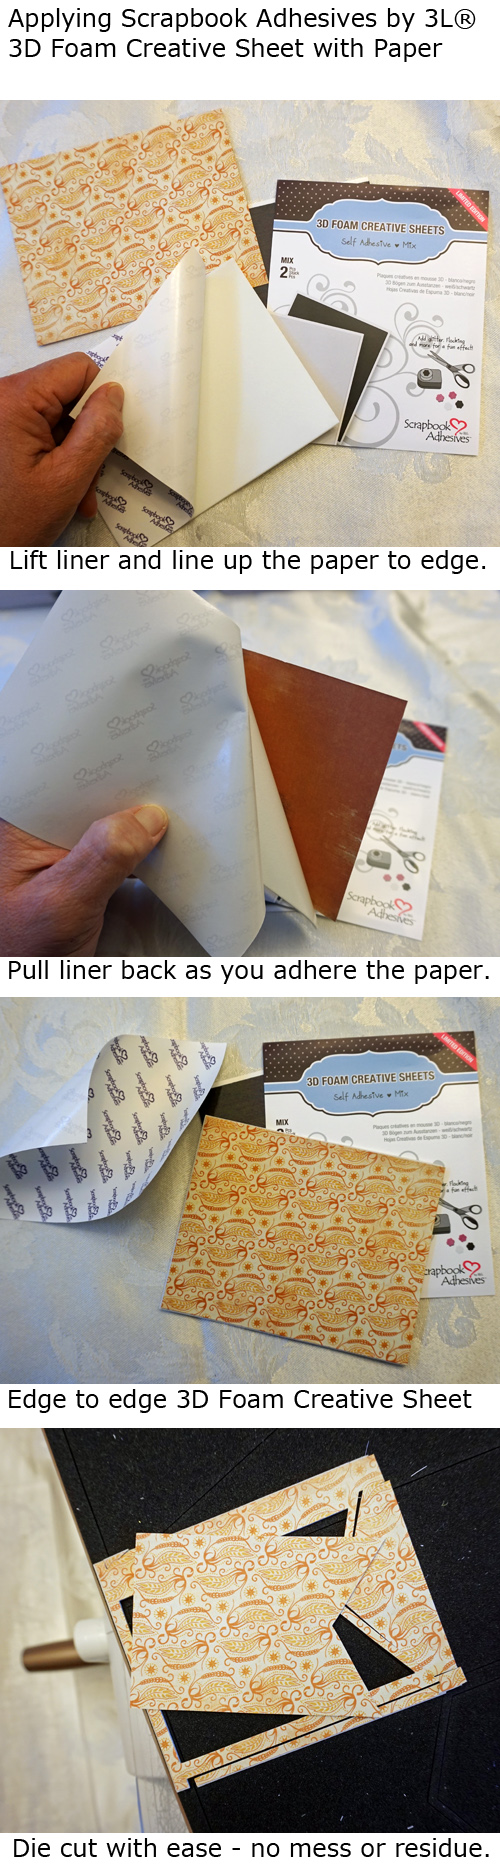 How to apply 3D Foam Creative Sheet to paper by Margie Higuchi for Scrapbook Adhesives by 3L